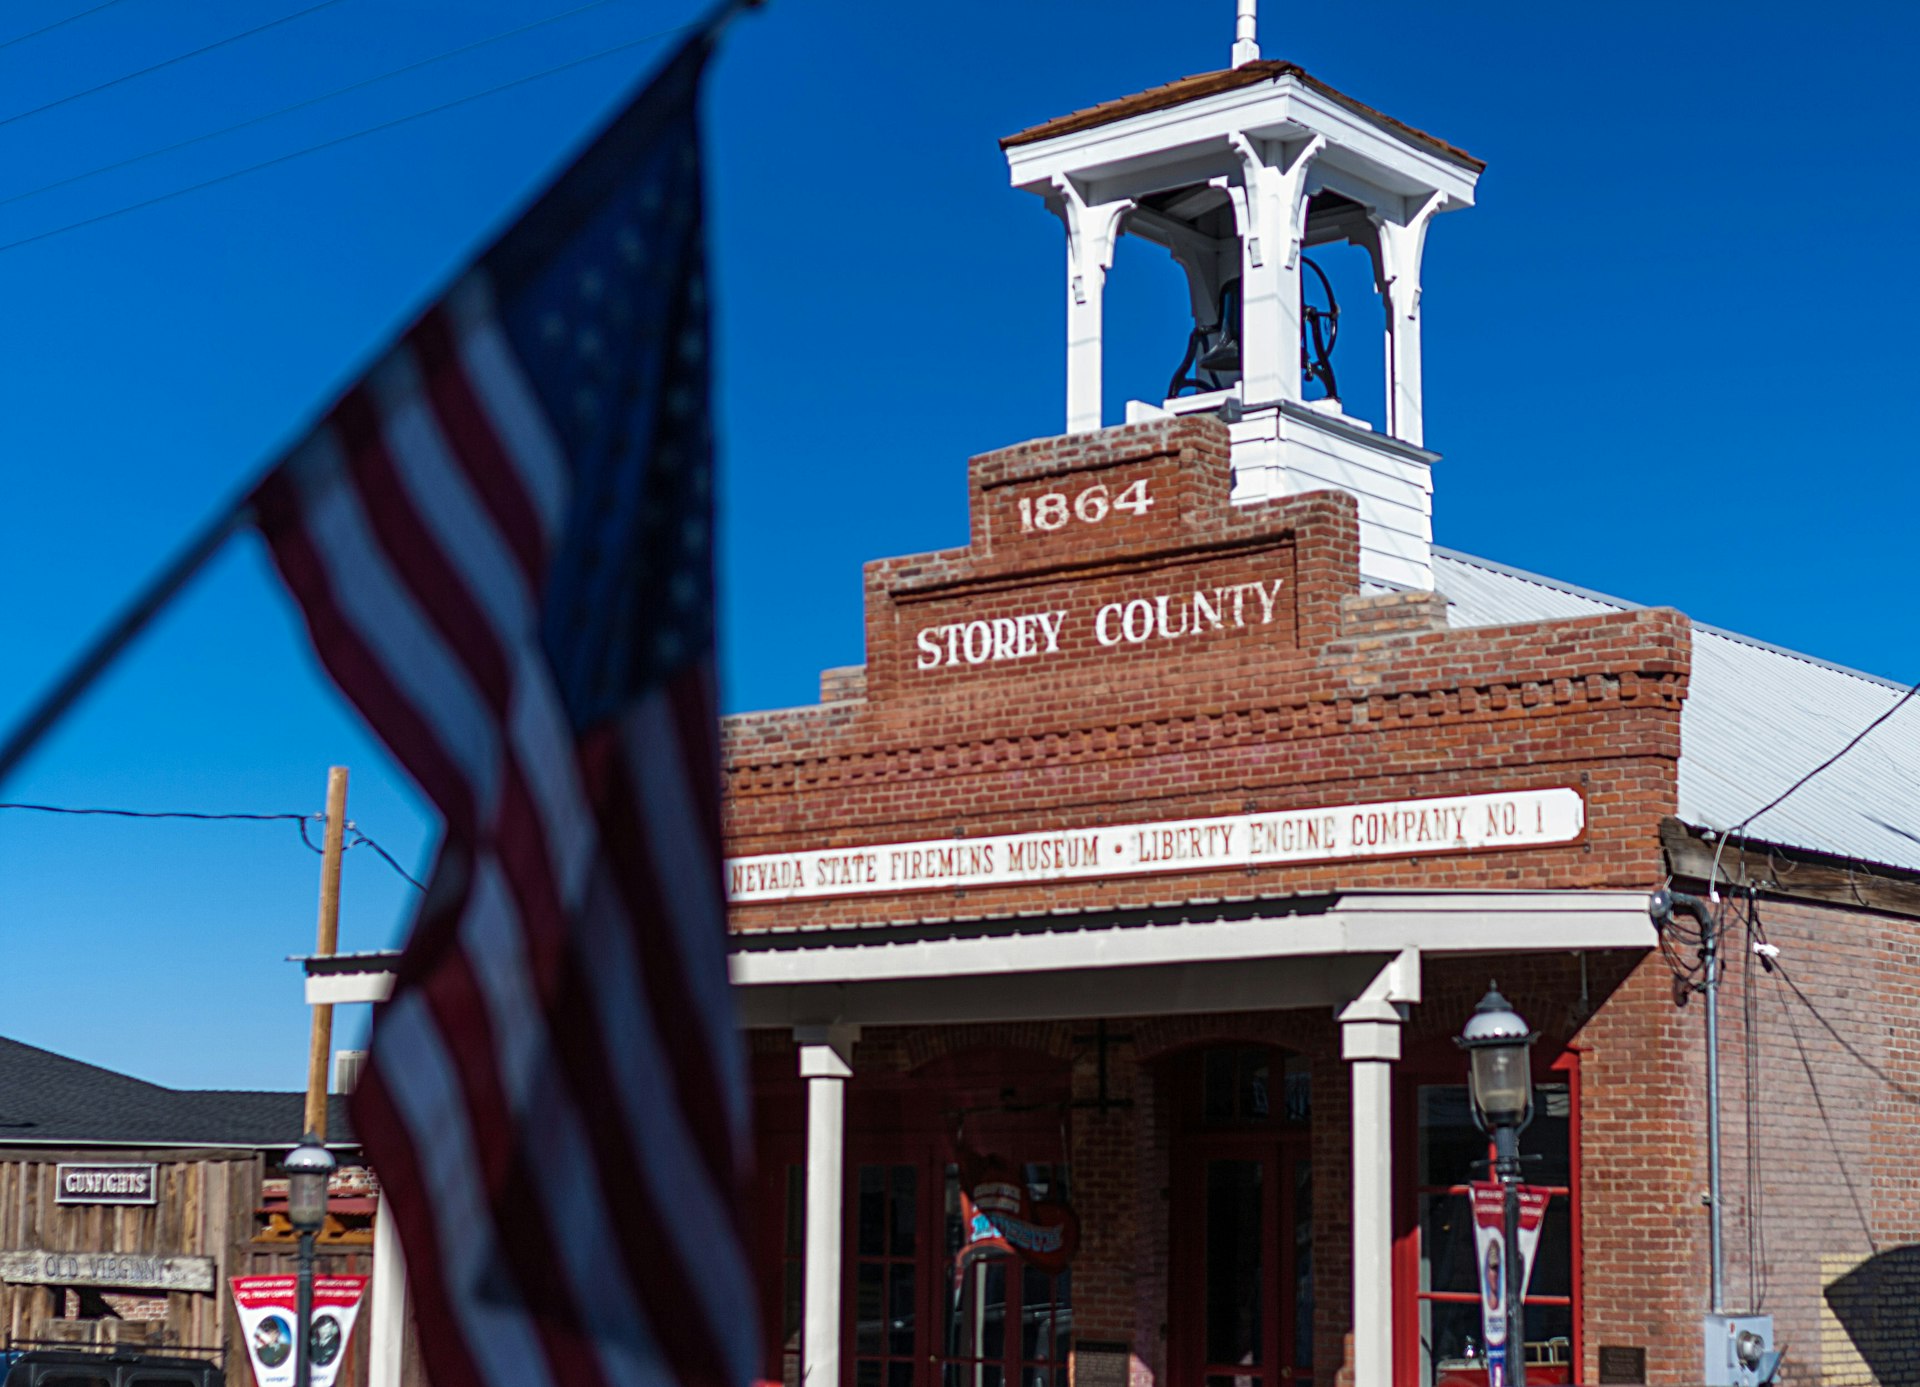 Nevada's historic towns are full of buildings built in the state's late 19th-century heyday. Image by Alexander Howard / Lonely Planet